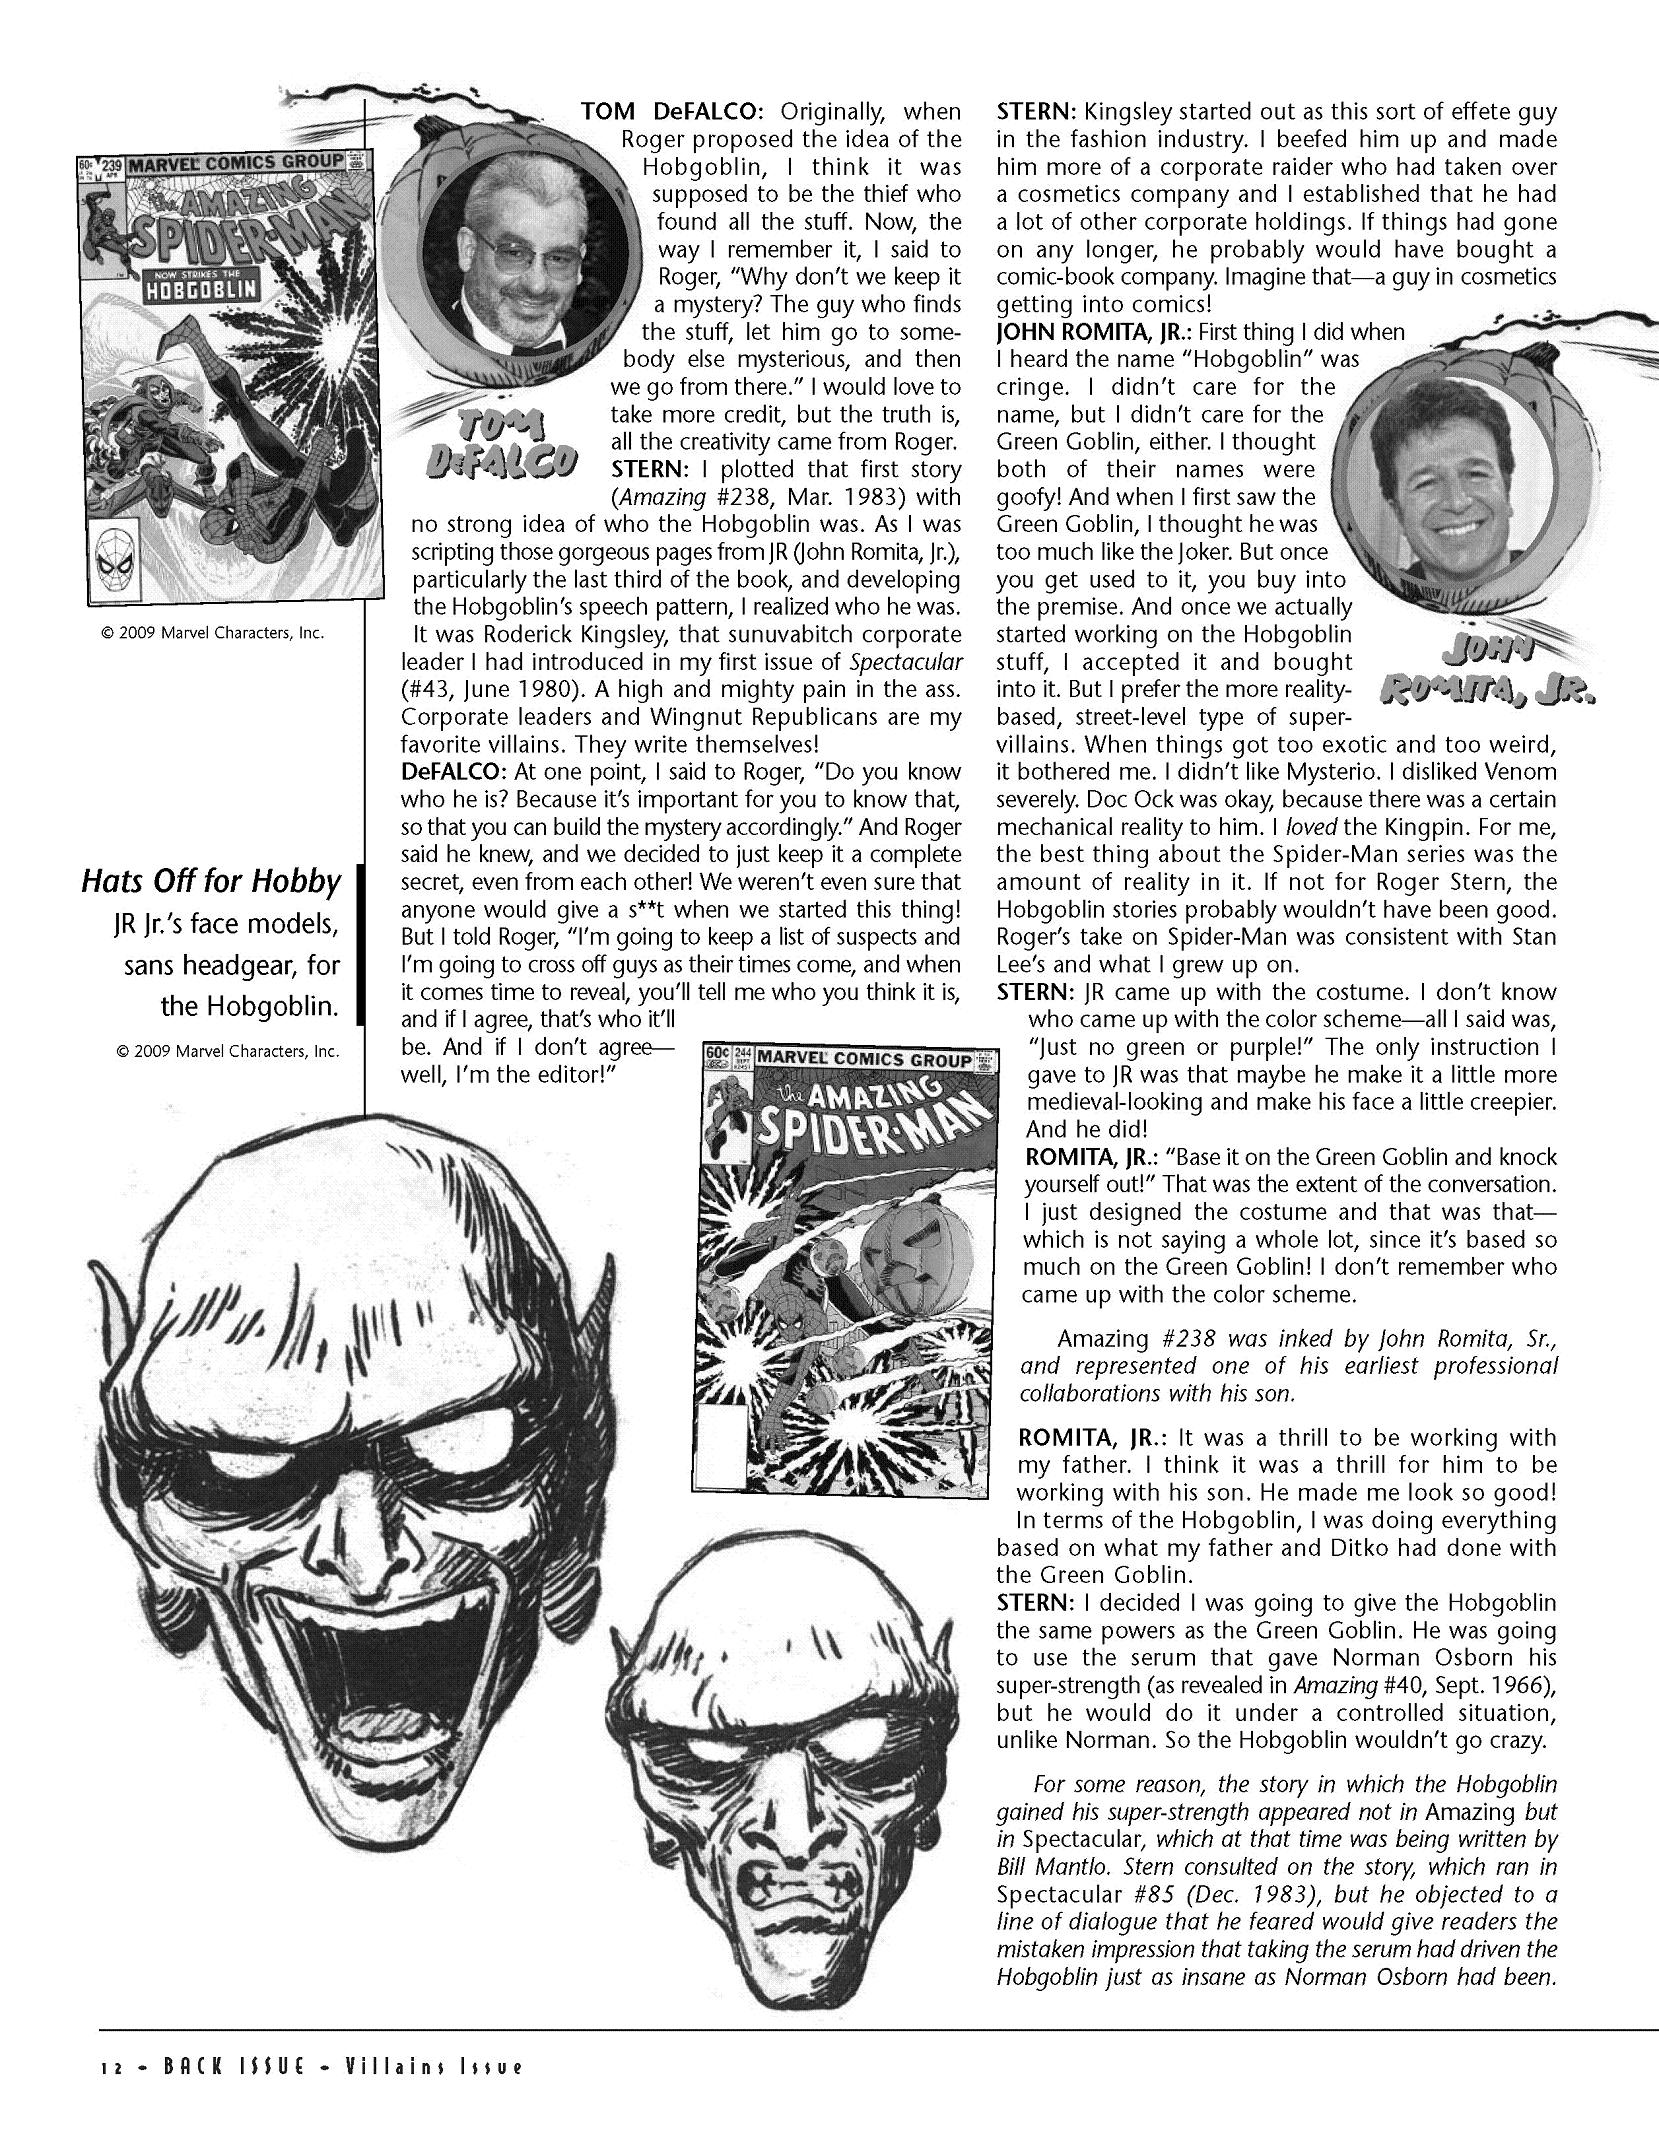 Read online Back Issue comic -  Issue #35 - 14